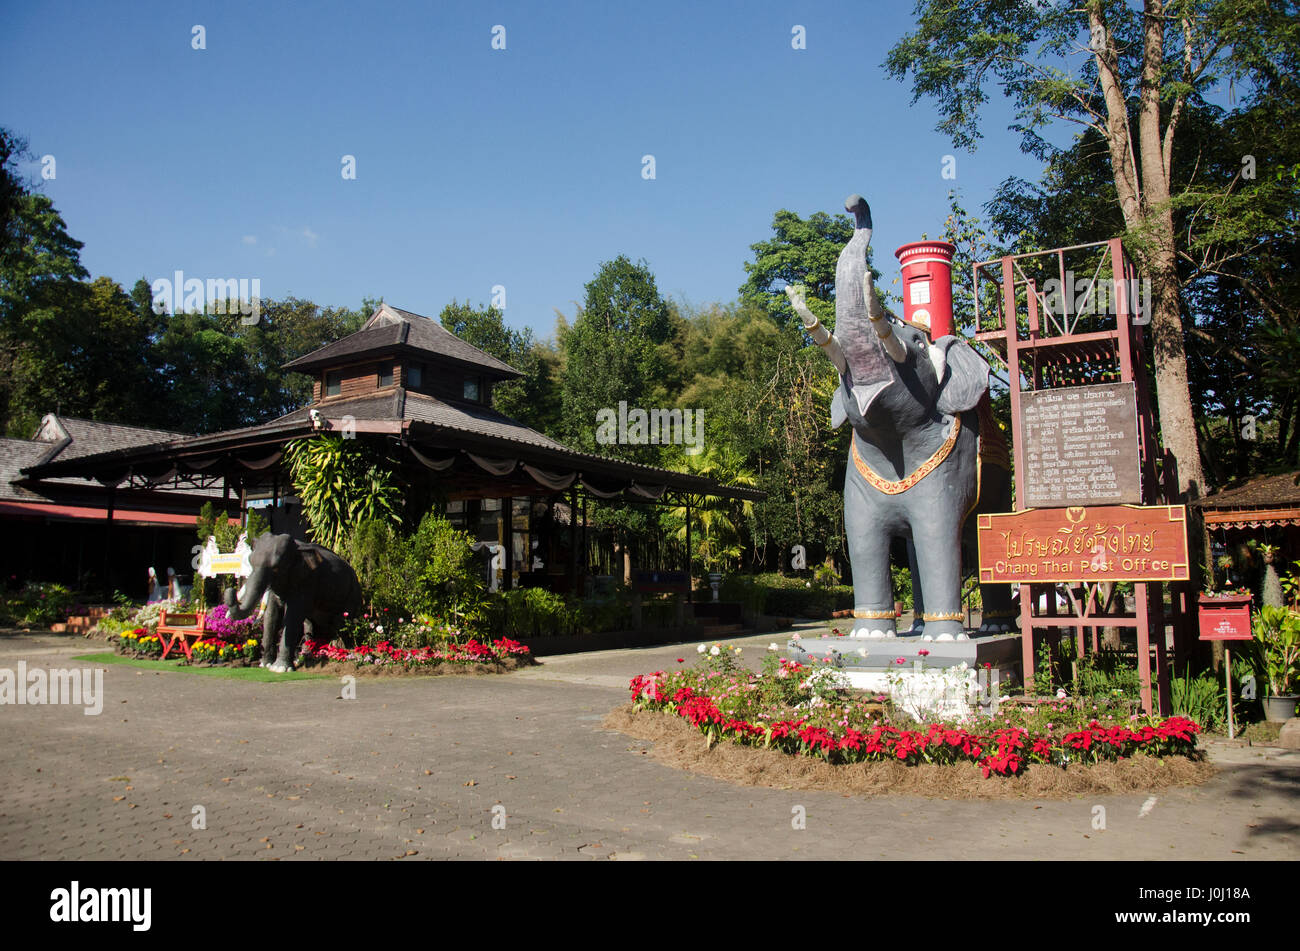 Landscape and building town of Thai Elephant Conservation Center Lampang for people visit and donation at Hang Chat on December 28, 2016 in Lampang, T Stock Photo